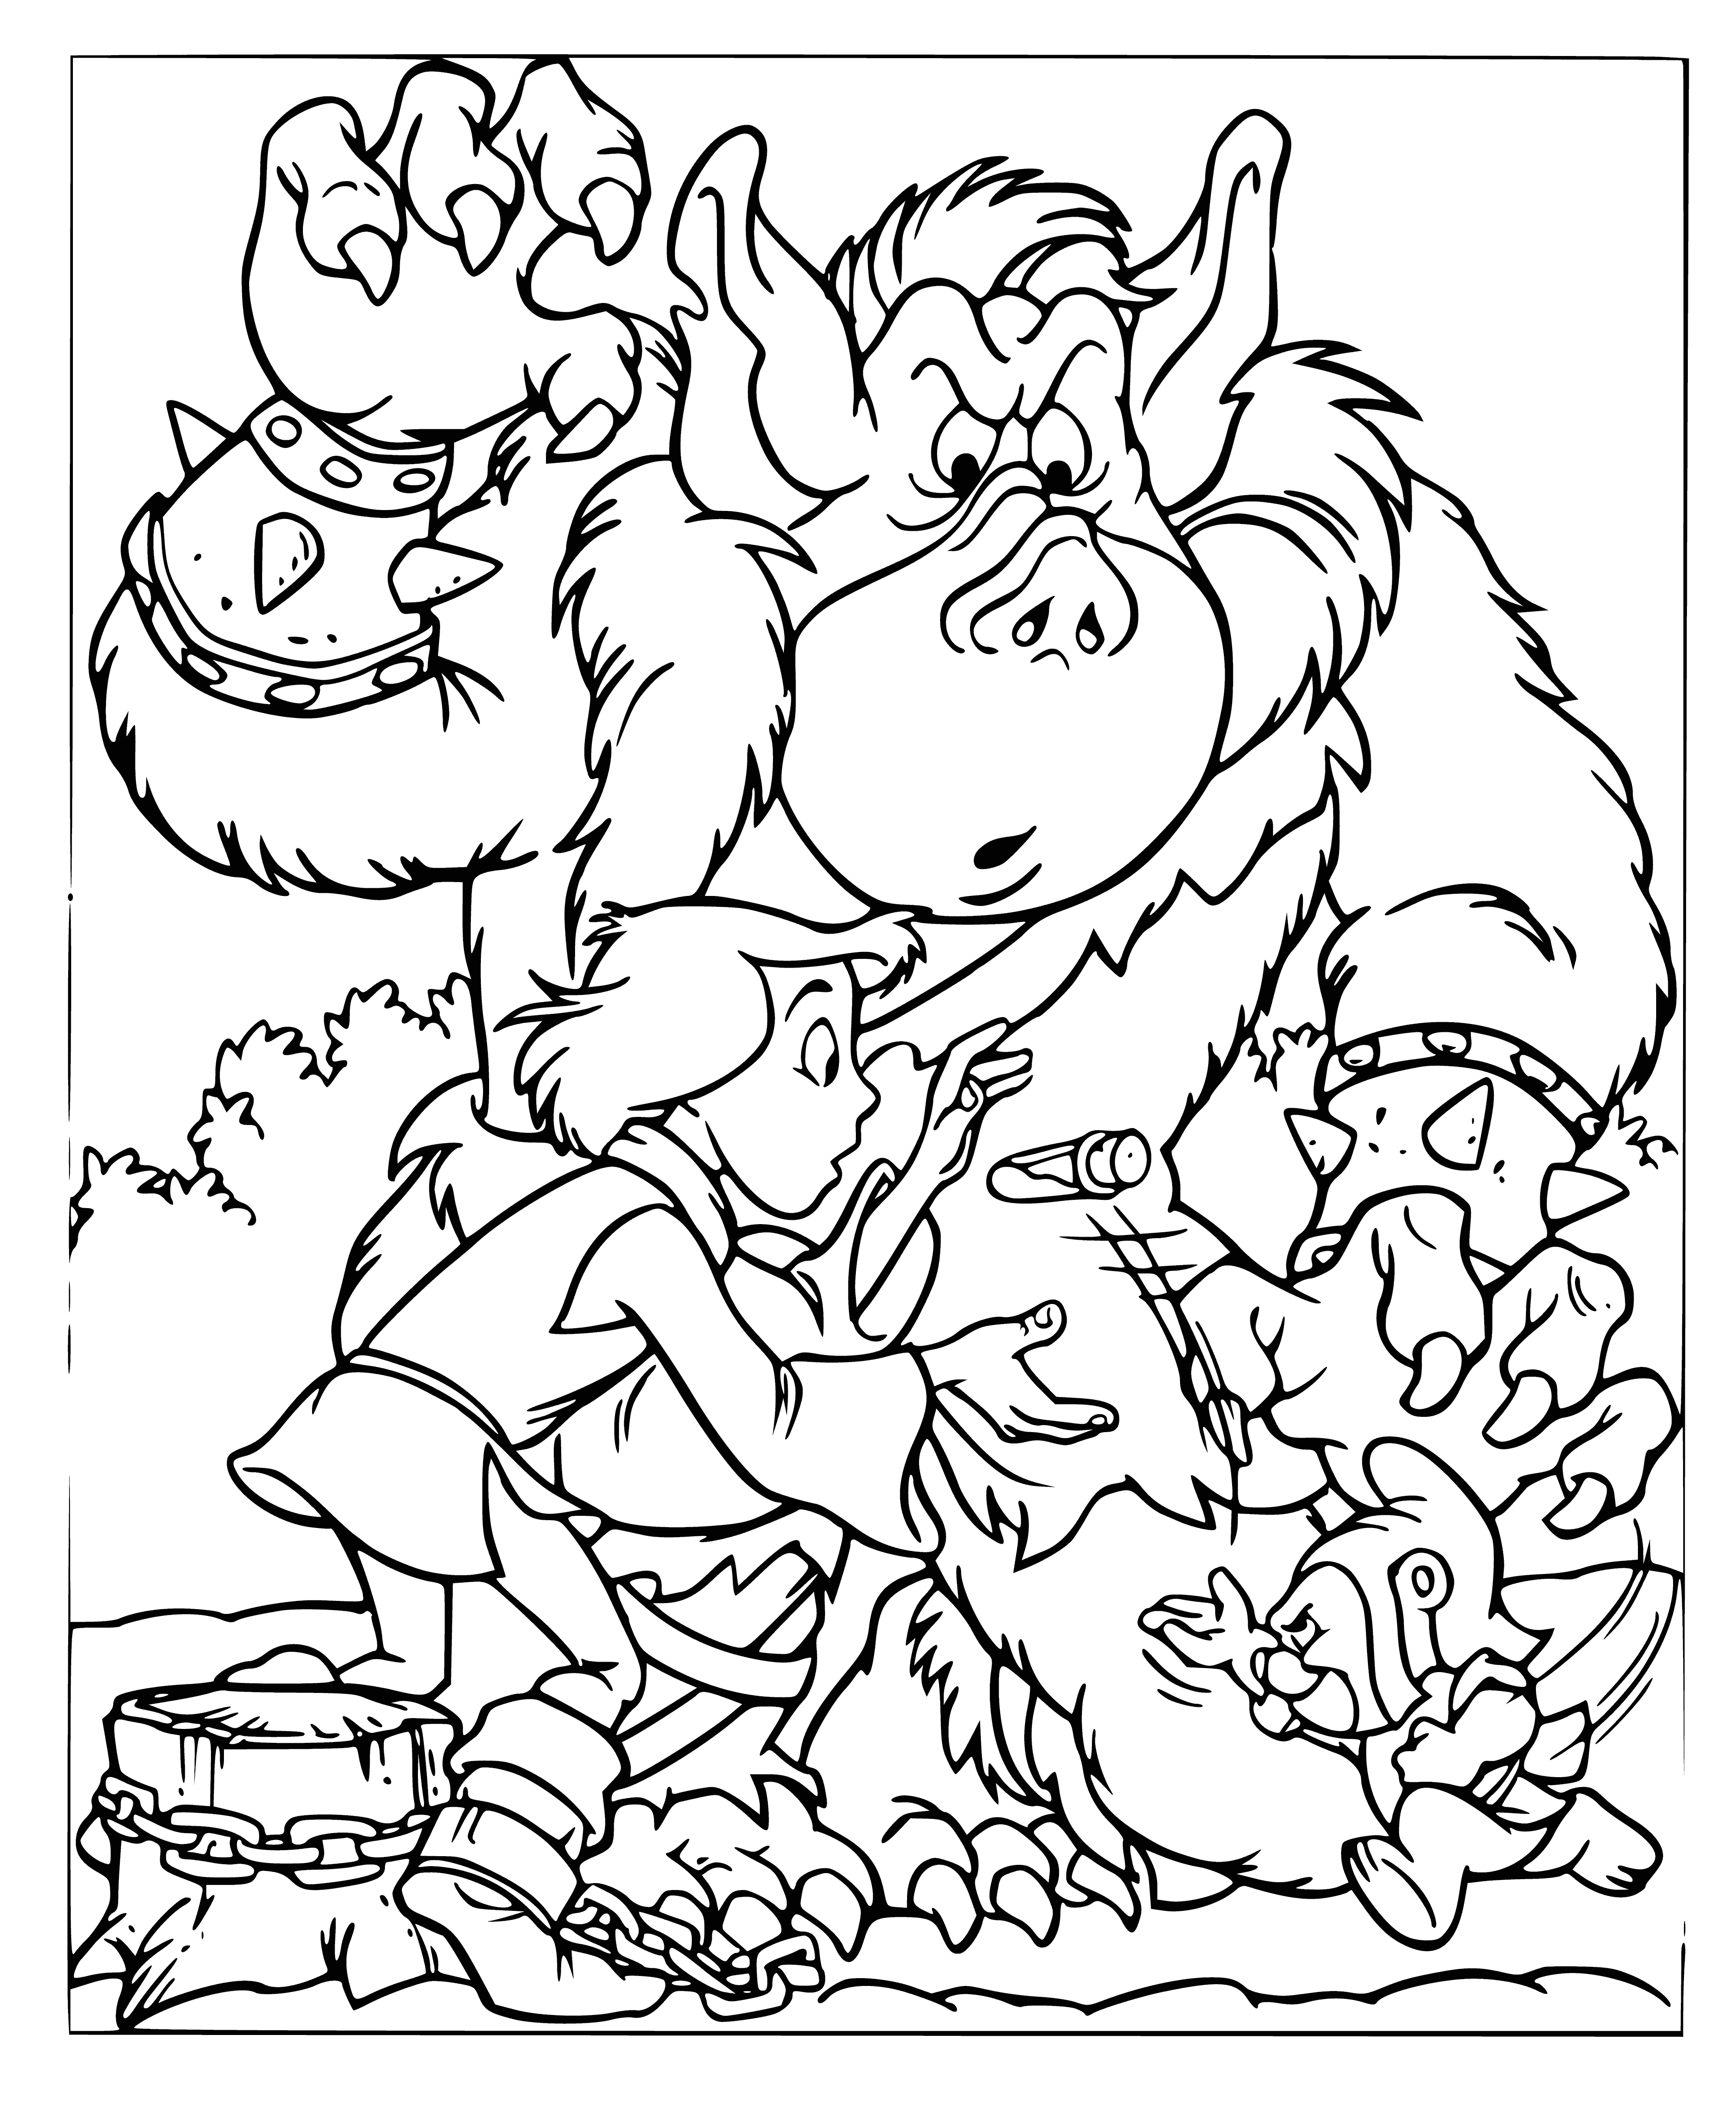 Goblin and Gummy Bears coloring page